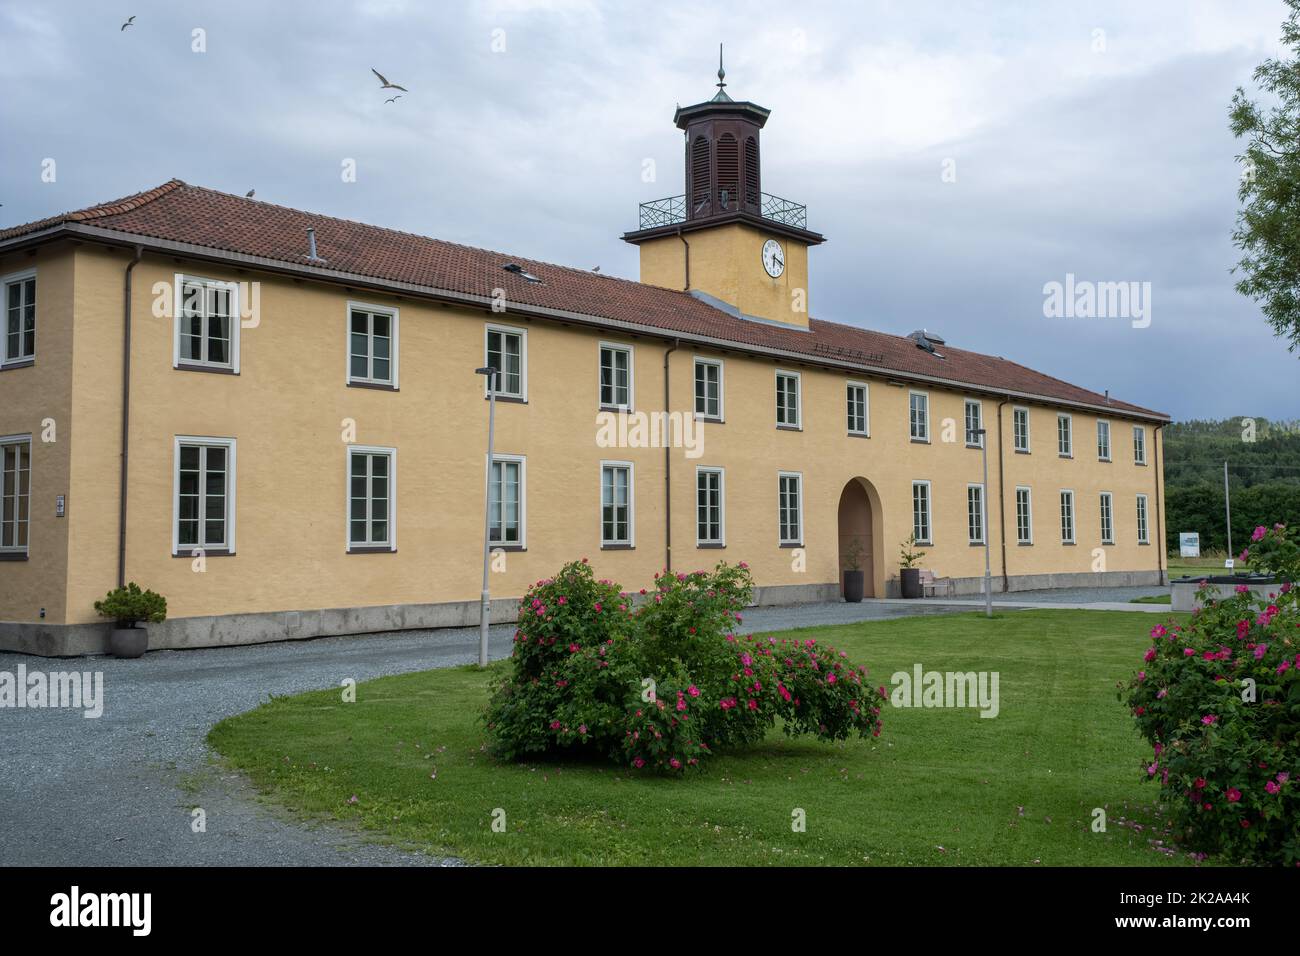 Ekne, Norway - July 05, 2022: Falstad was a German internment and transit camp during world war two. More than 200 prisoners were shot in the nearby f Stock Photo